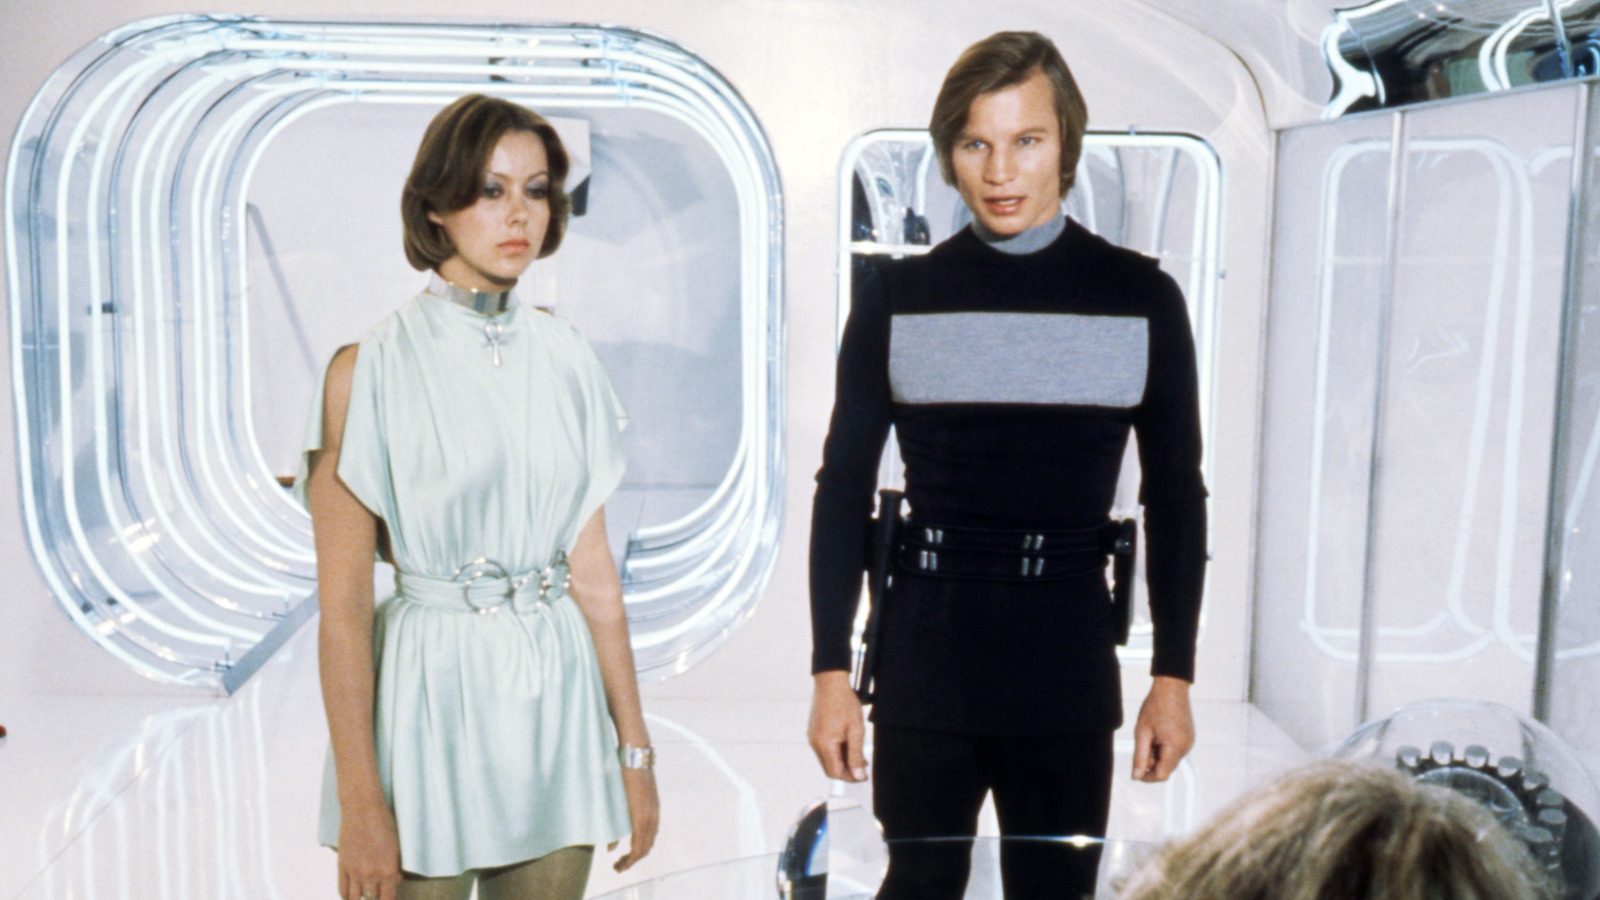 The Only Major Actors Still Alive From Logan’s Run